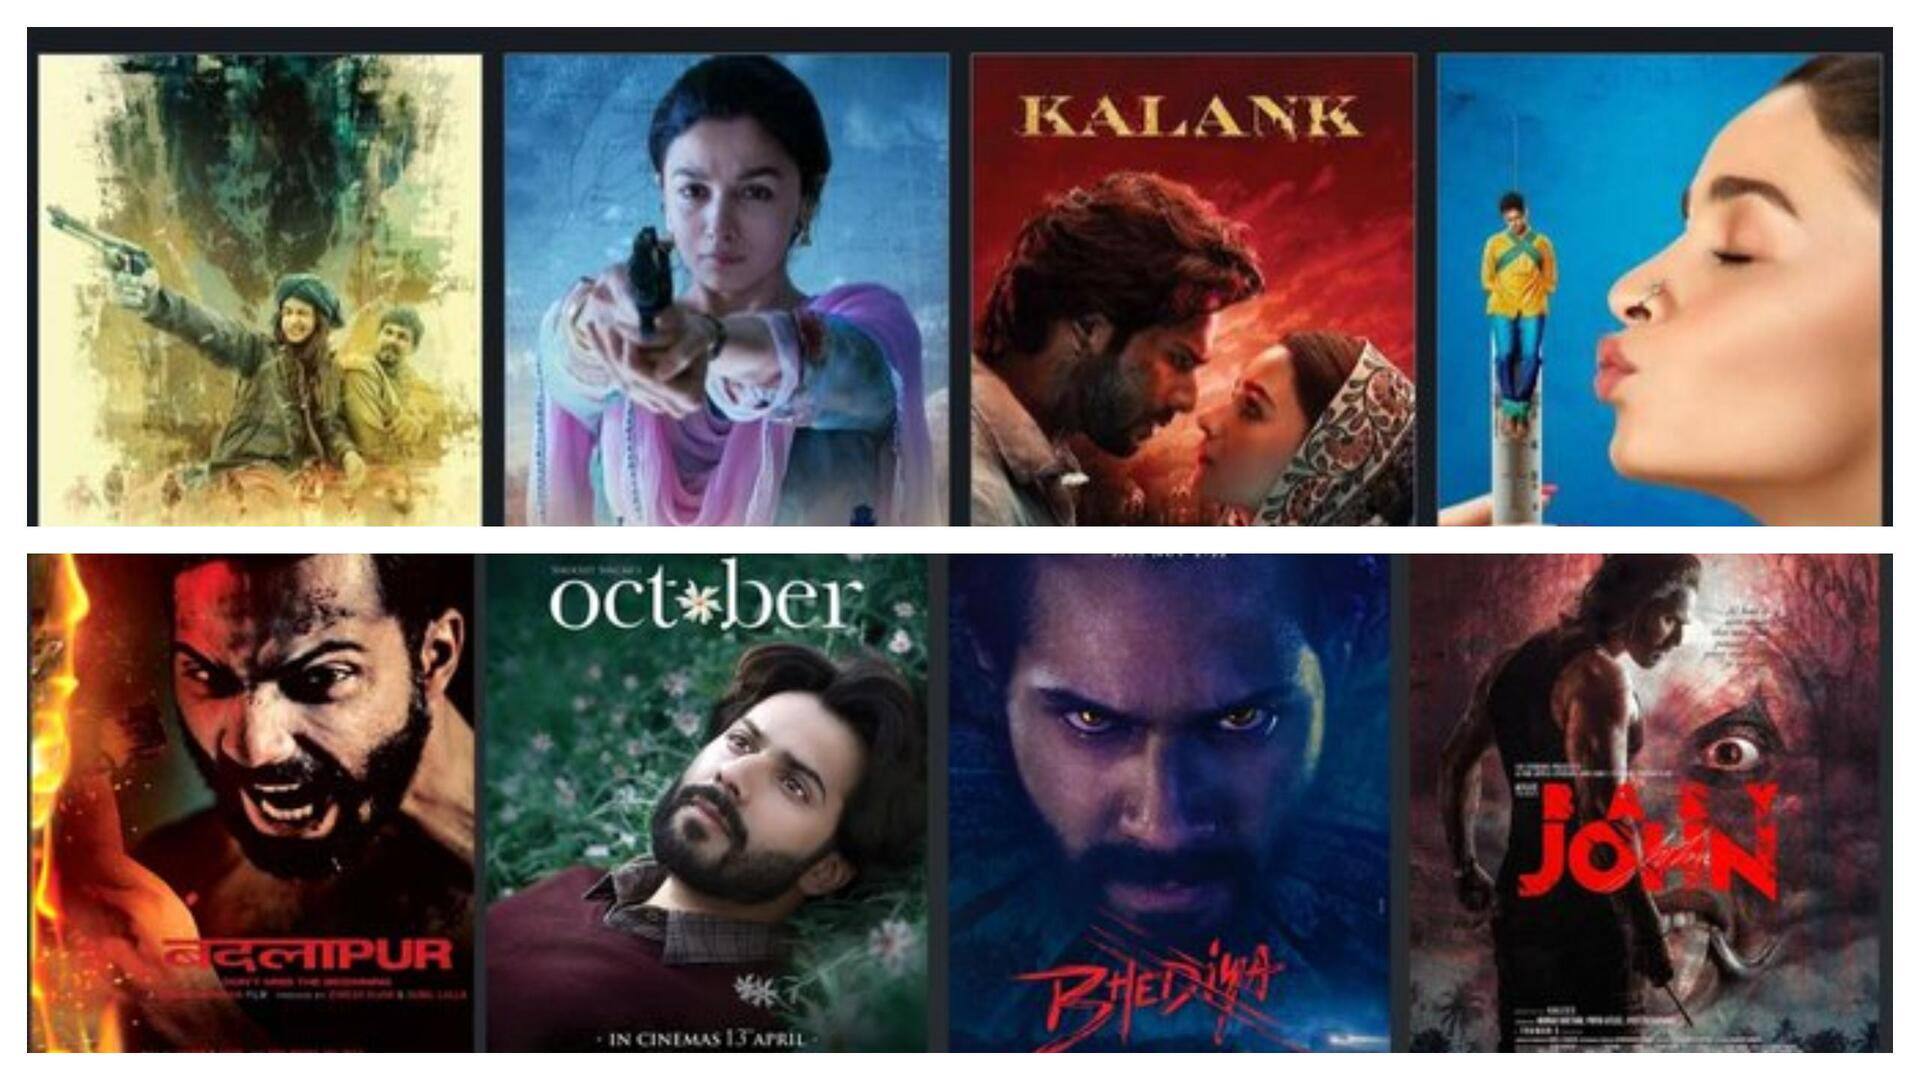 X users share hilarious categories for Bollywood films on Letterboxd